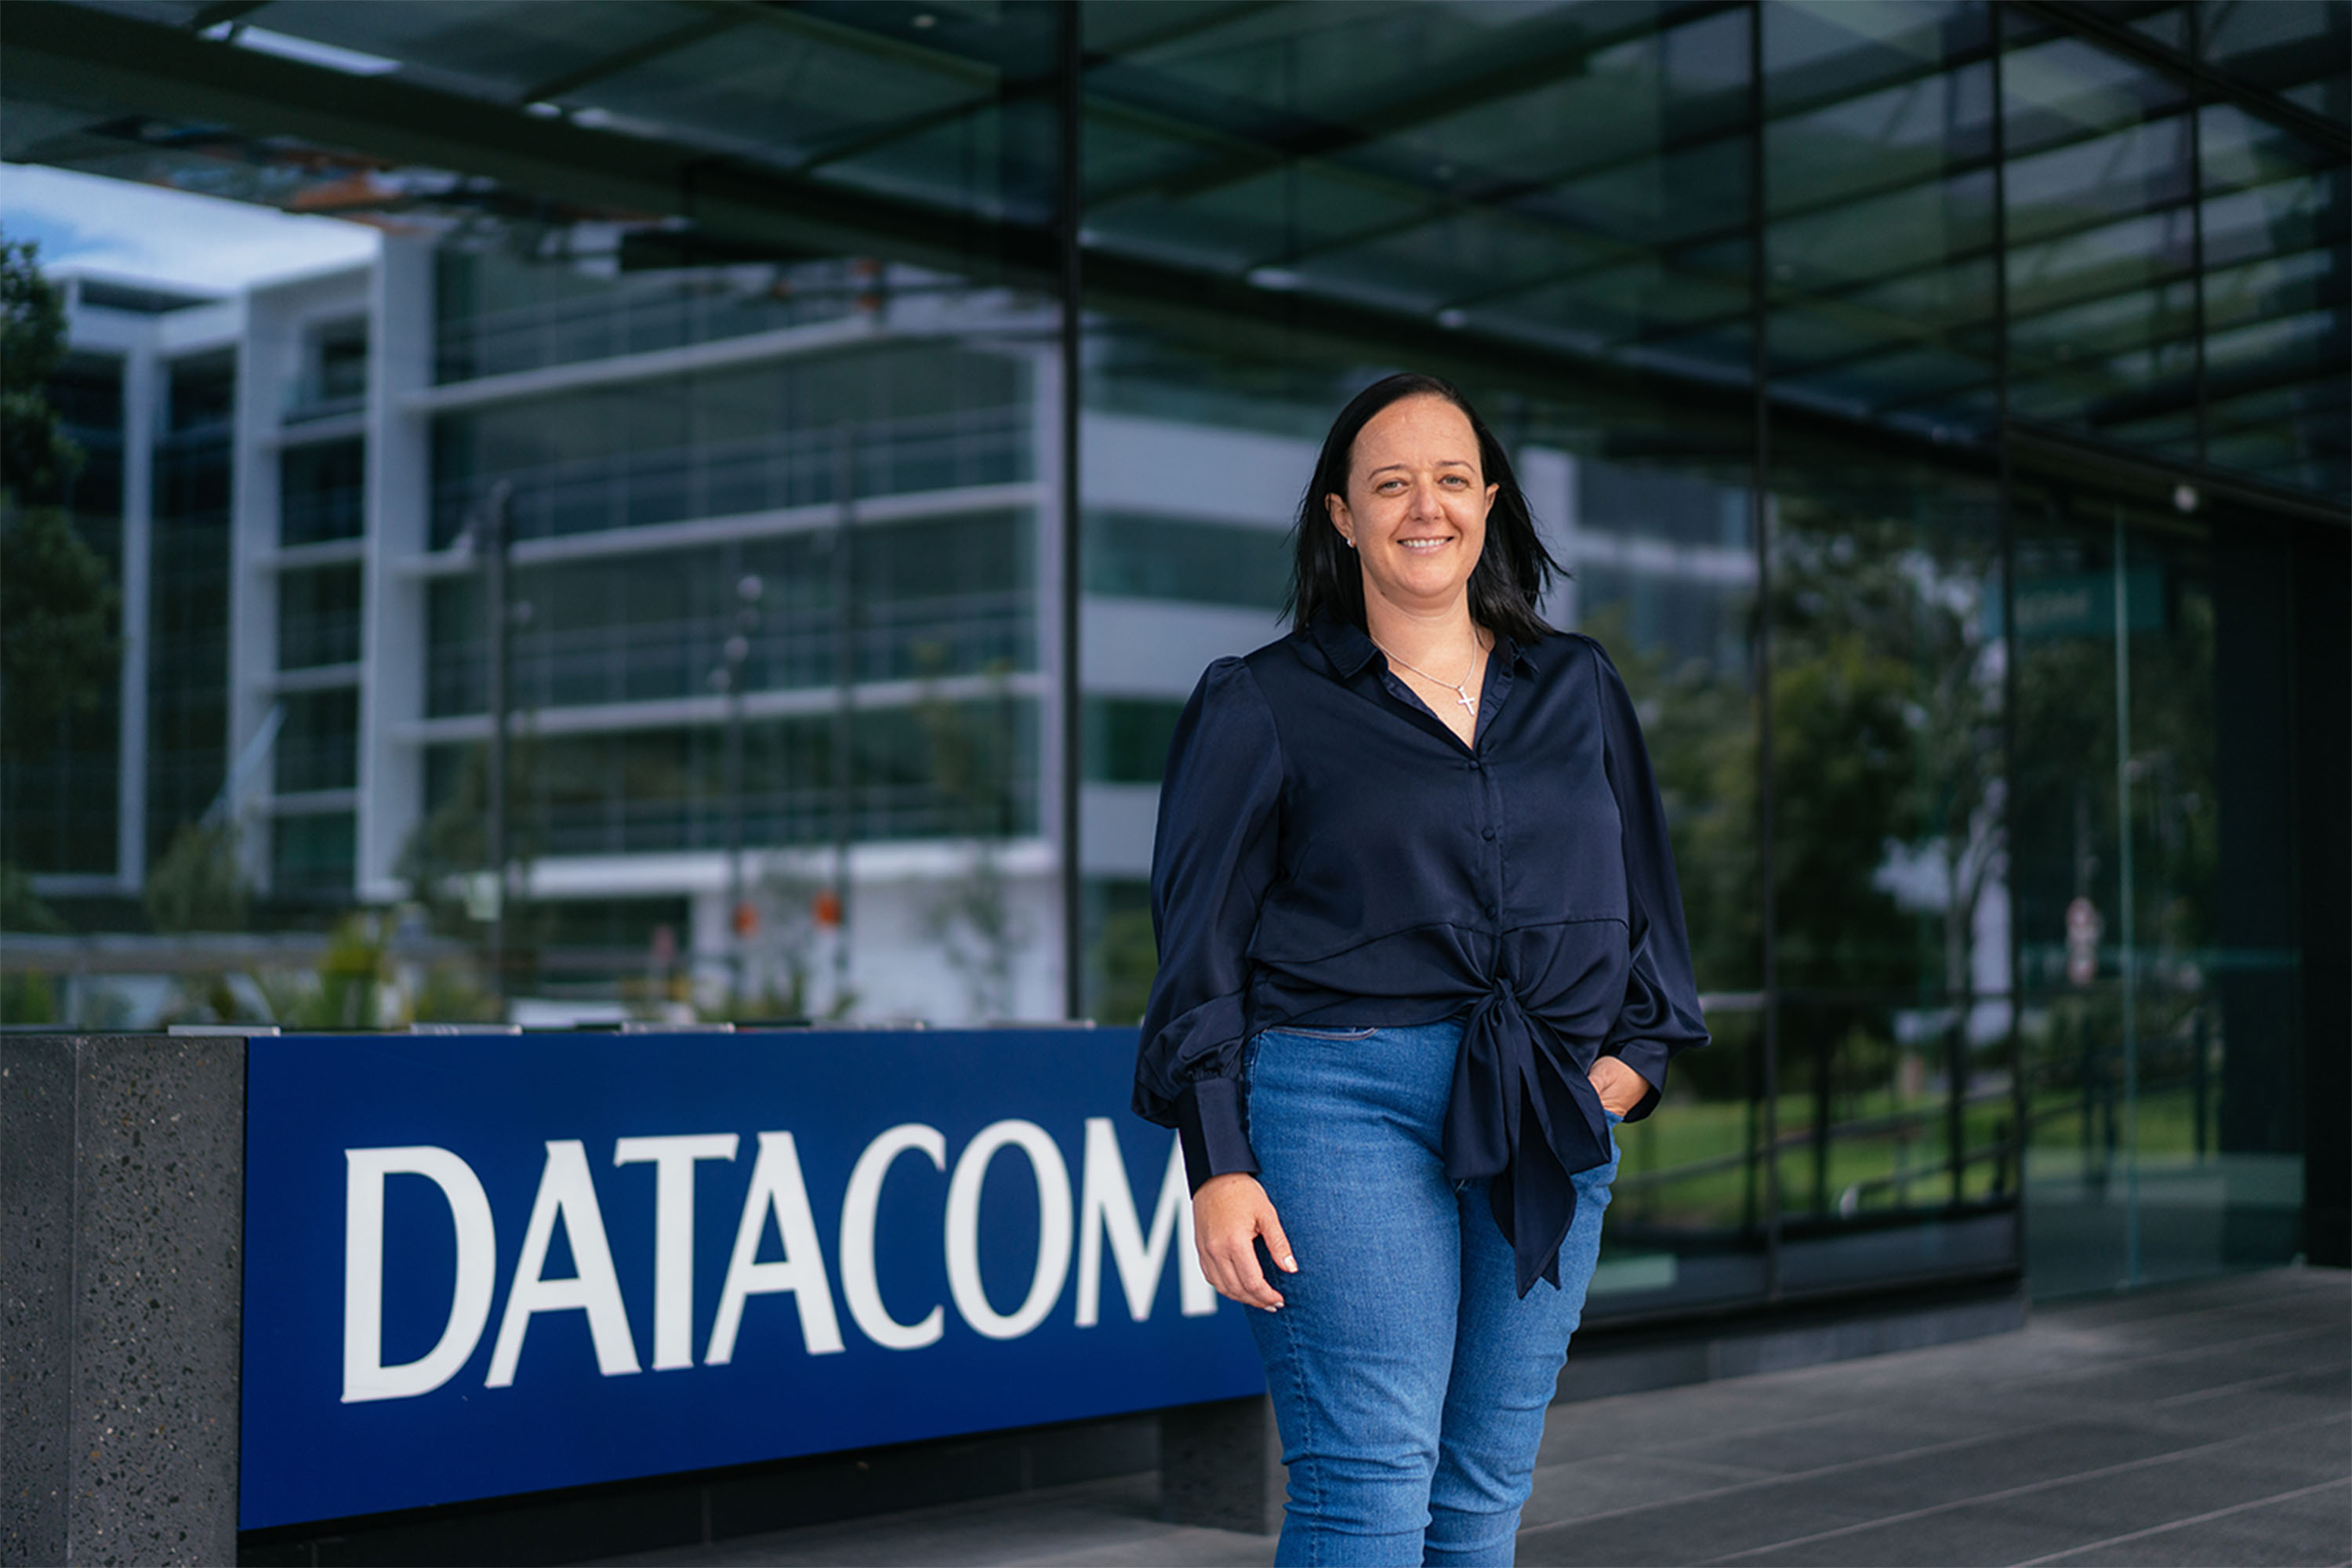 Datacom's Desiree Hutcheon in front of a blue Datacom sign